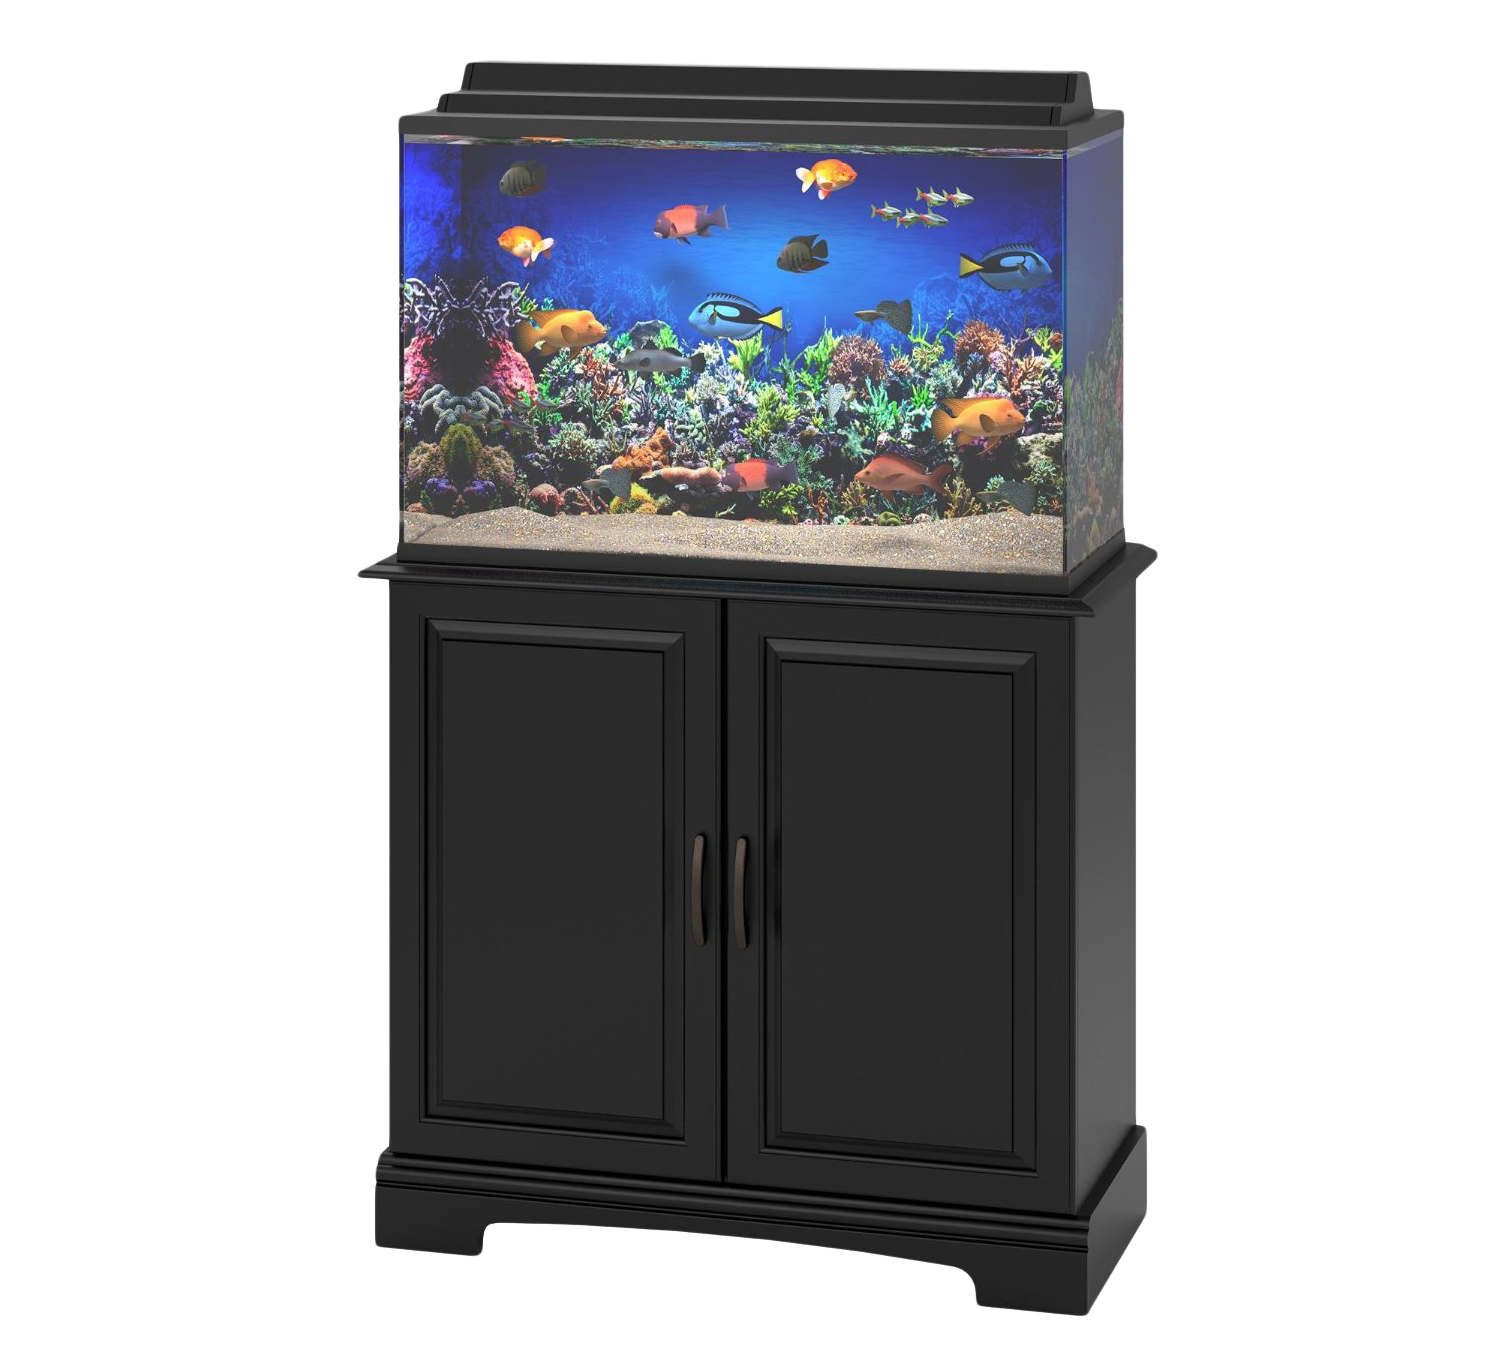 A Fish Tank On A Cabinet